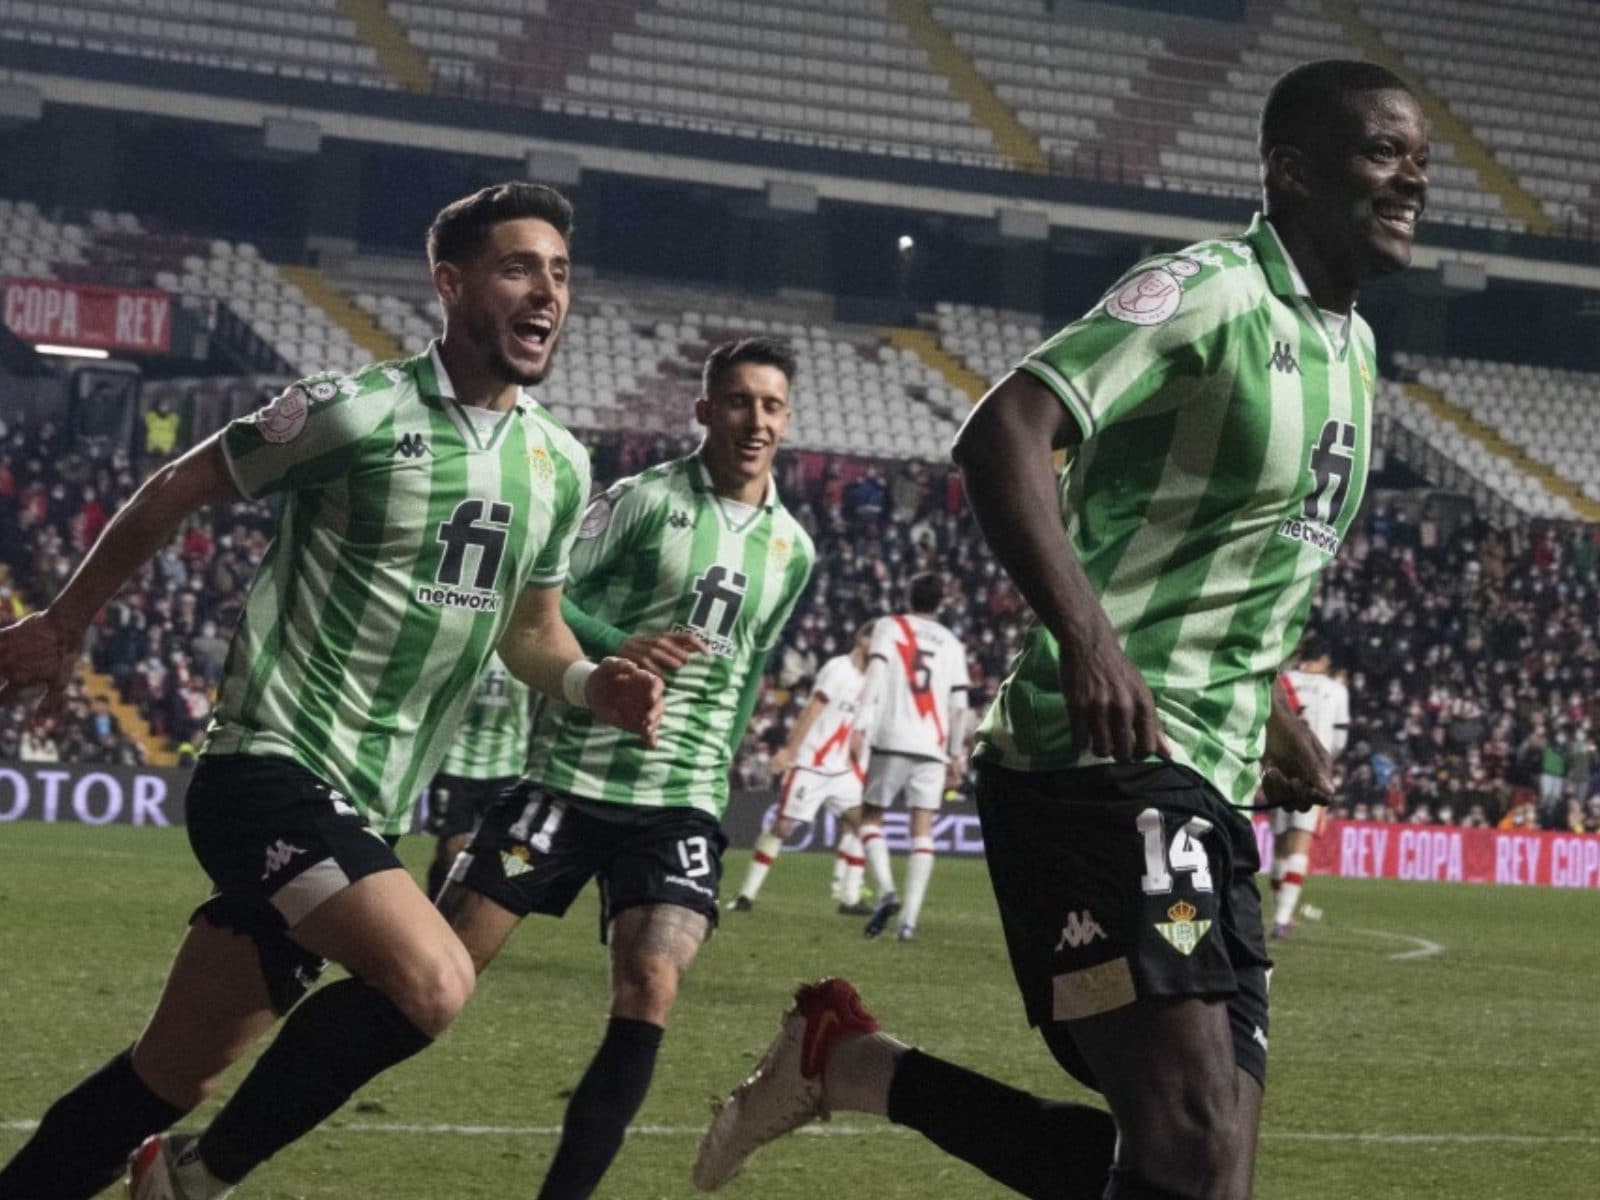 Betis leads Rayo in the Copa semifinals thanks to a goal from William Carvalho.